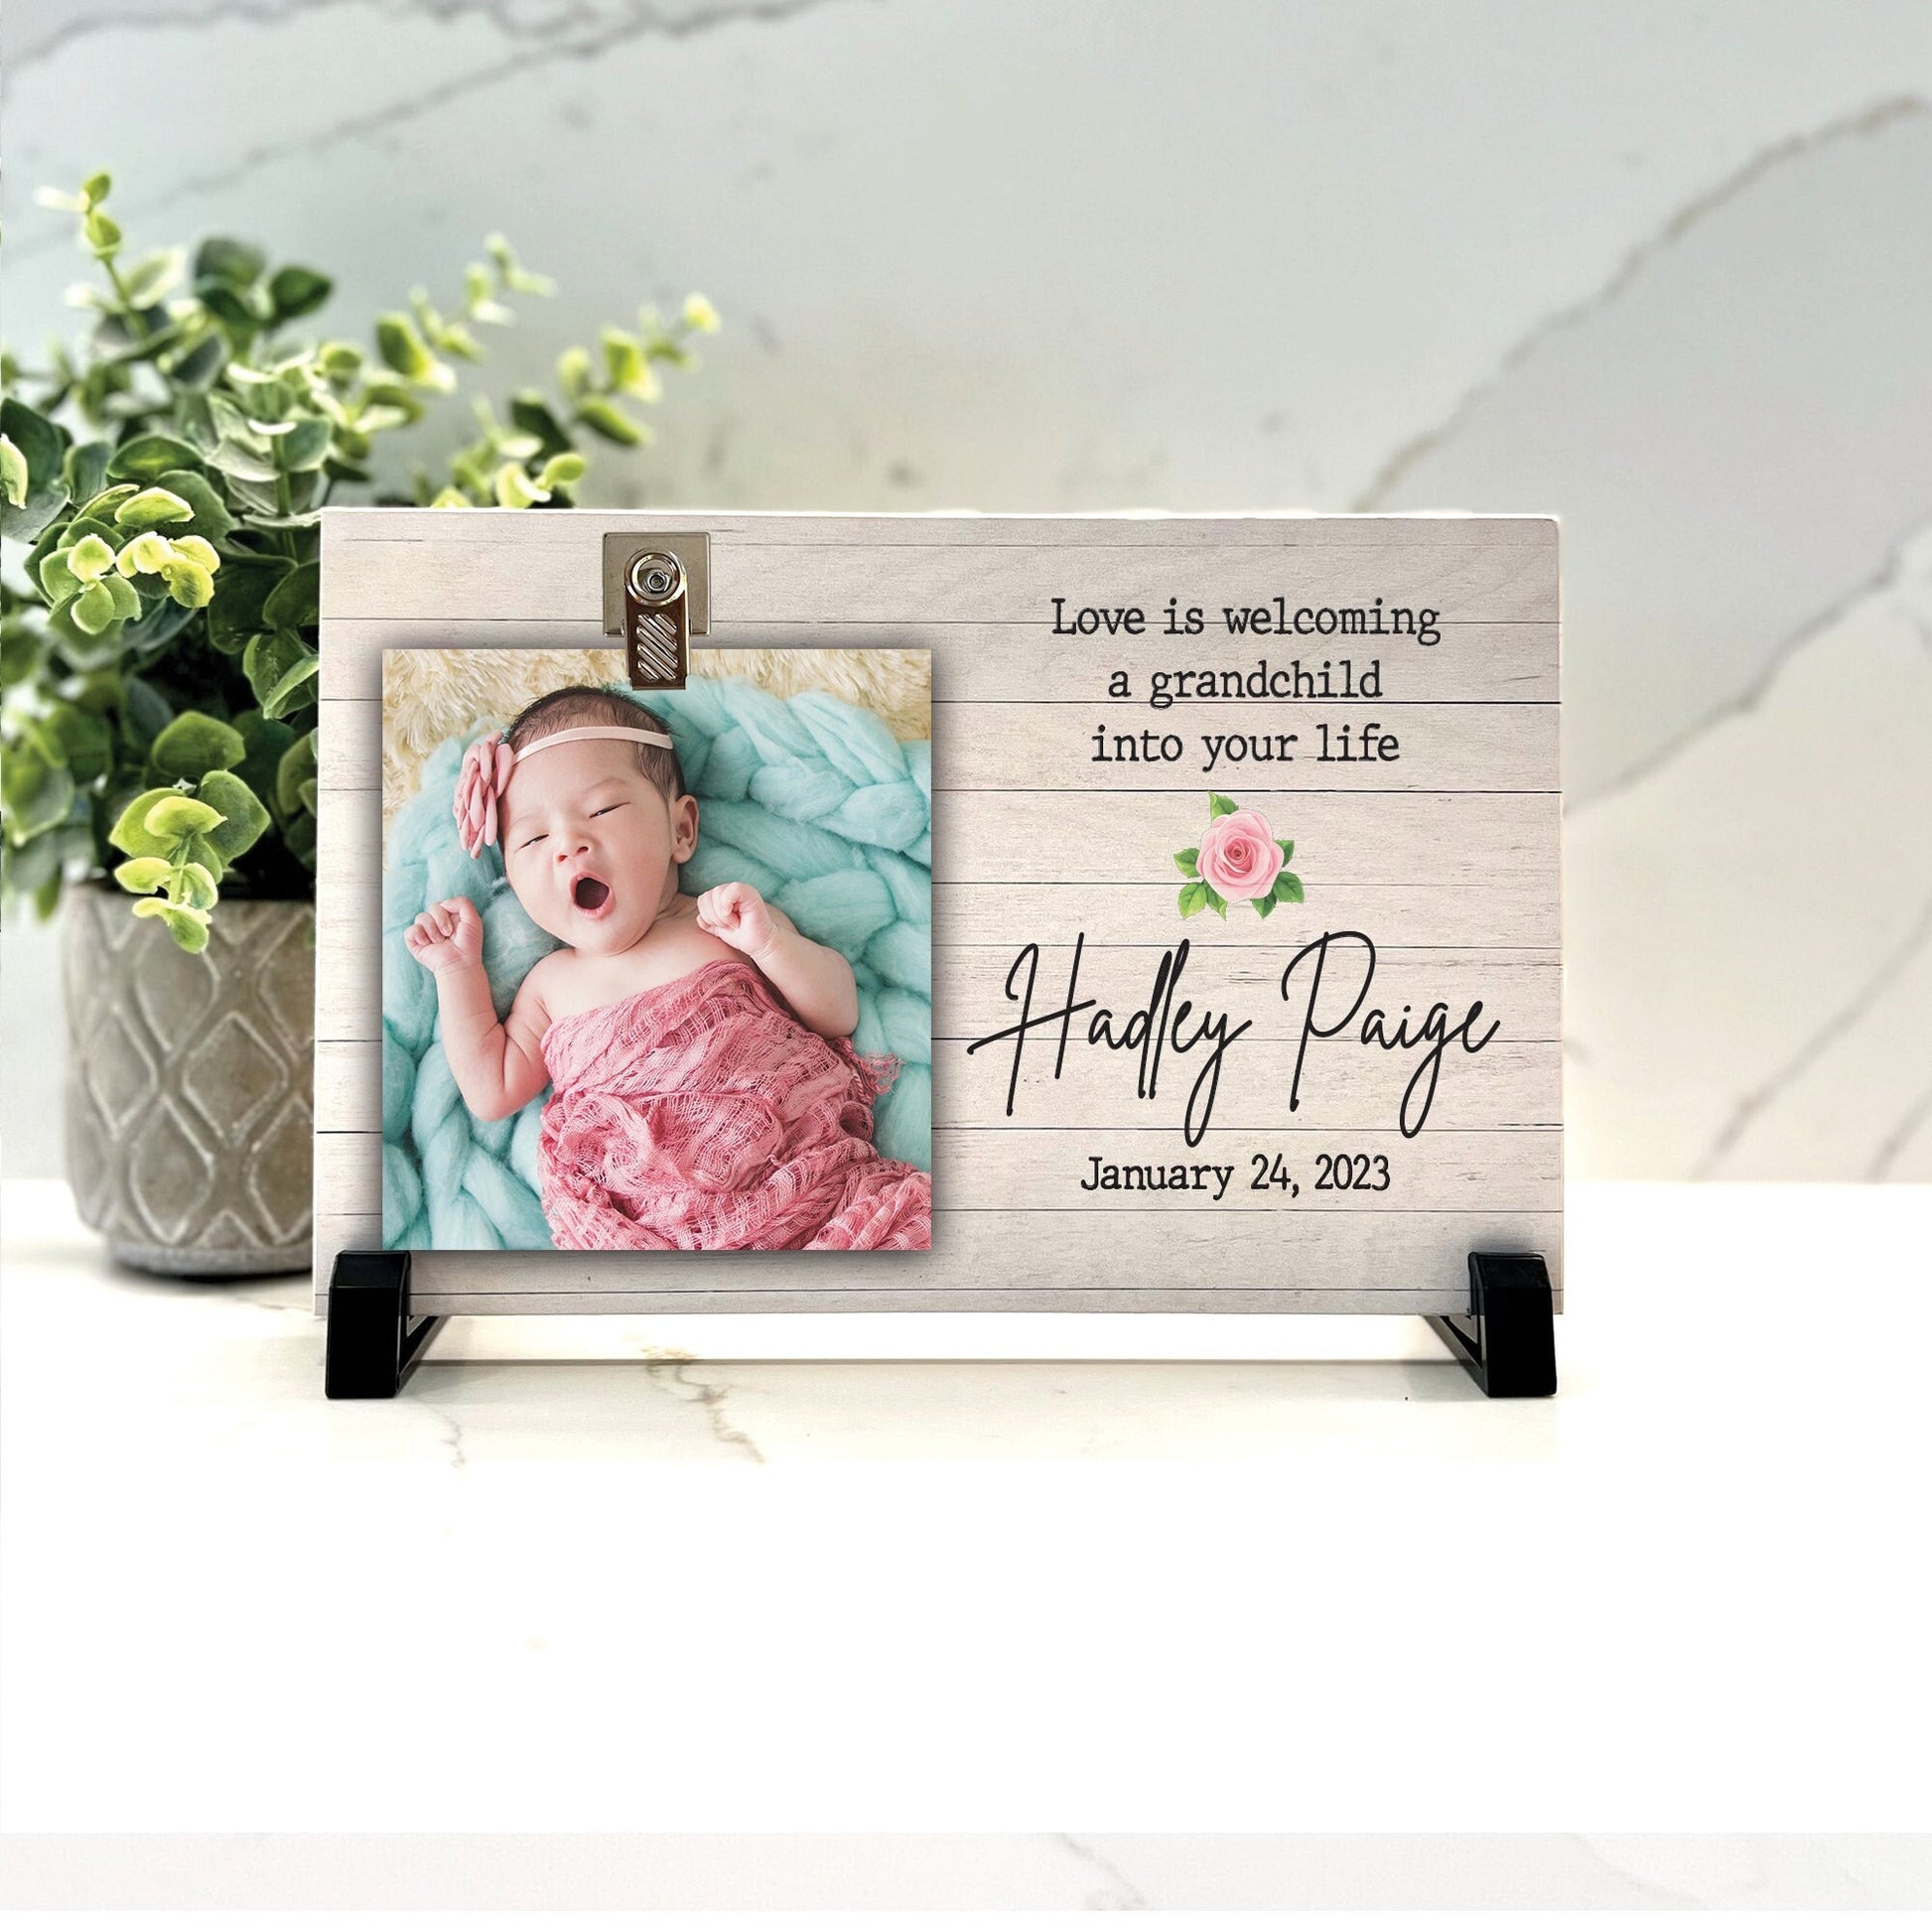 Customize your cherished moments with our New Grandparents Personalized Picture Frame available at www.florida-funshine.com. Create a heartfelt gift for family and friends with free personalization, quick shipping in 1-2 business days, and quality crafted picture frames, portraits, and plaques made in the USA."